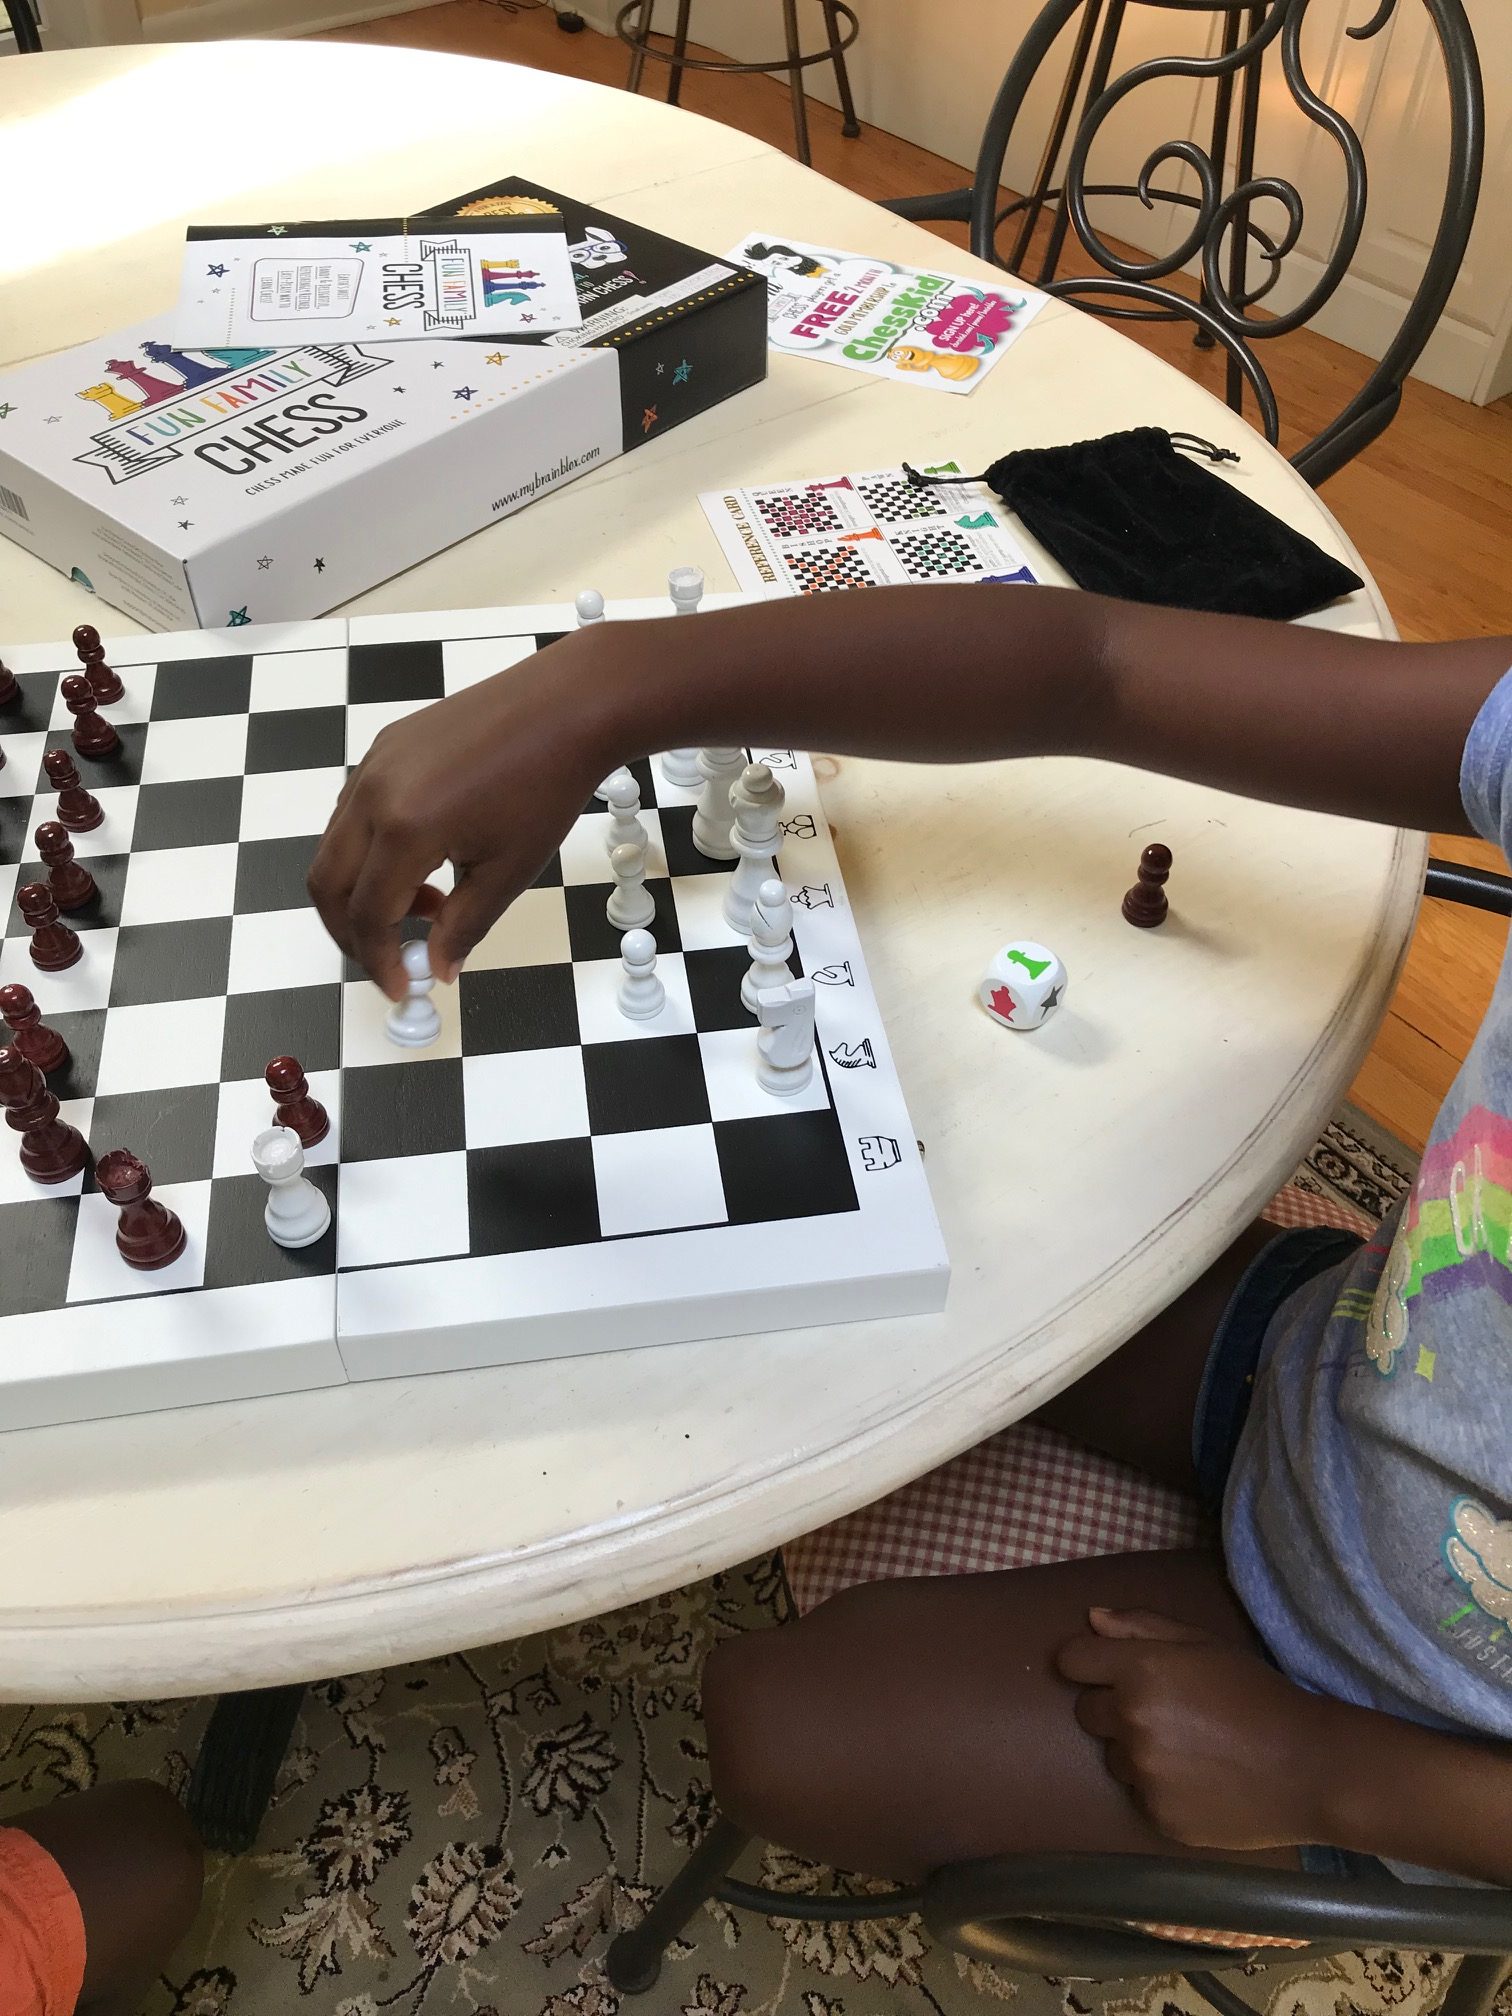 The Easiset Way to Learn How to Play Chess for Ages 5 – 105: Brainblox  Family Fun Chess